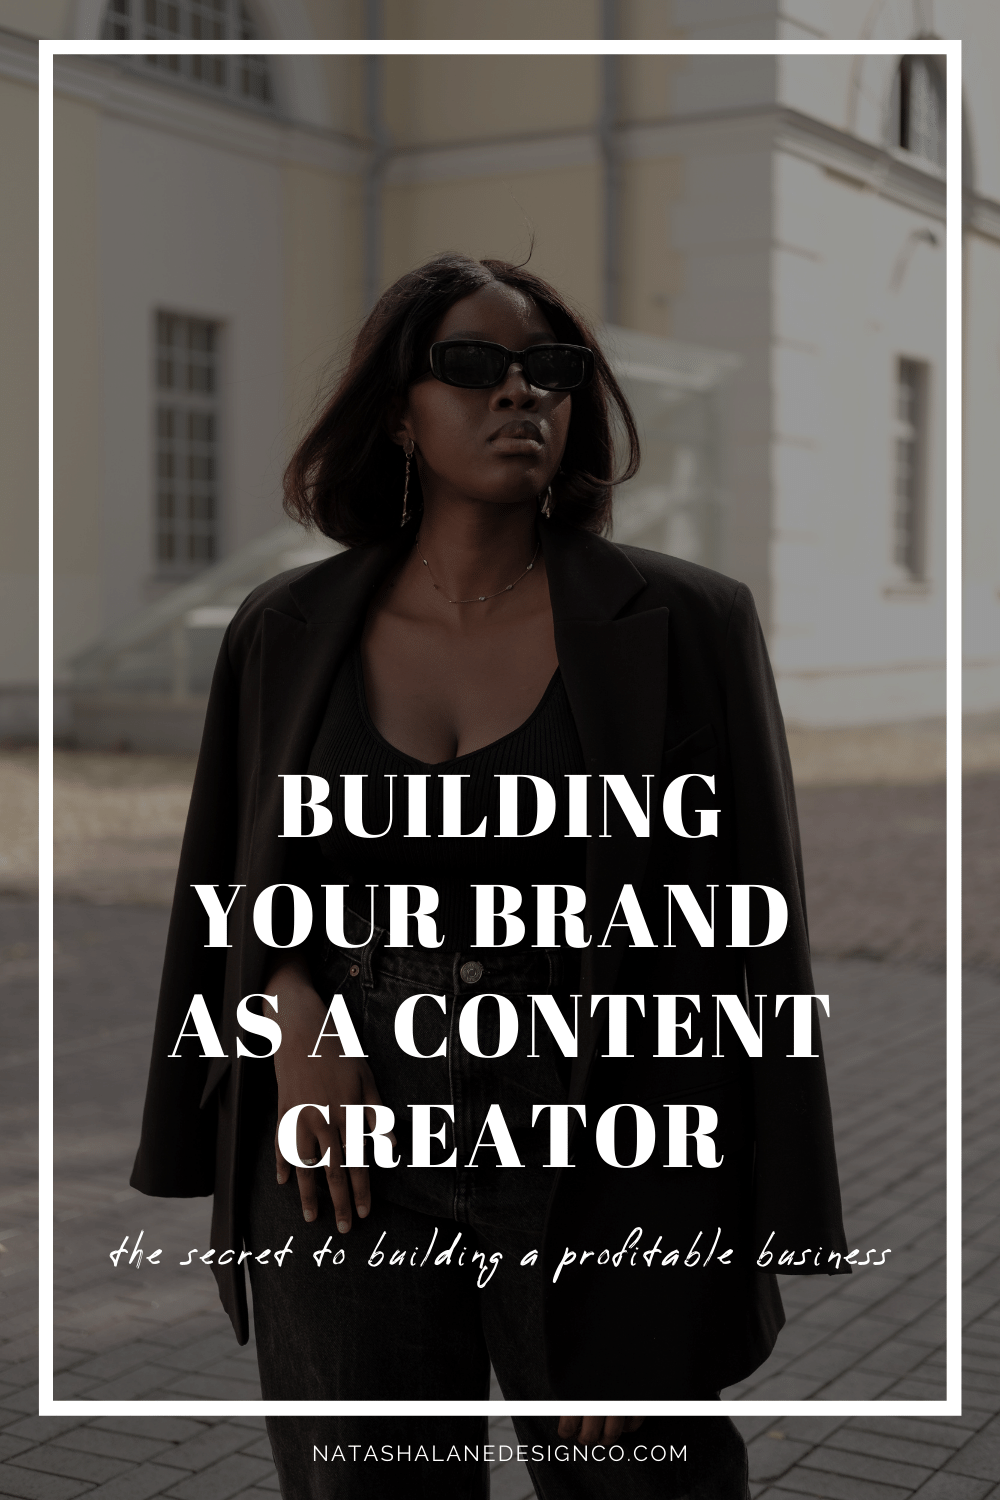 Building your brand as a content creator